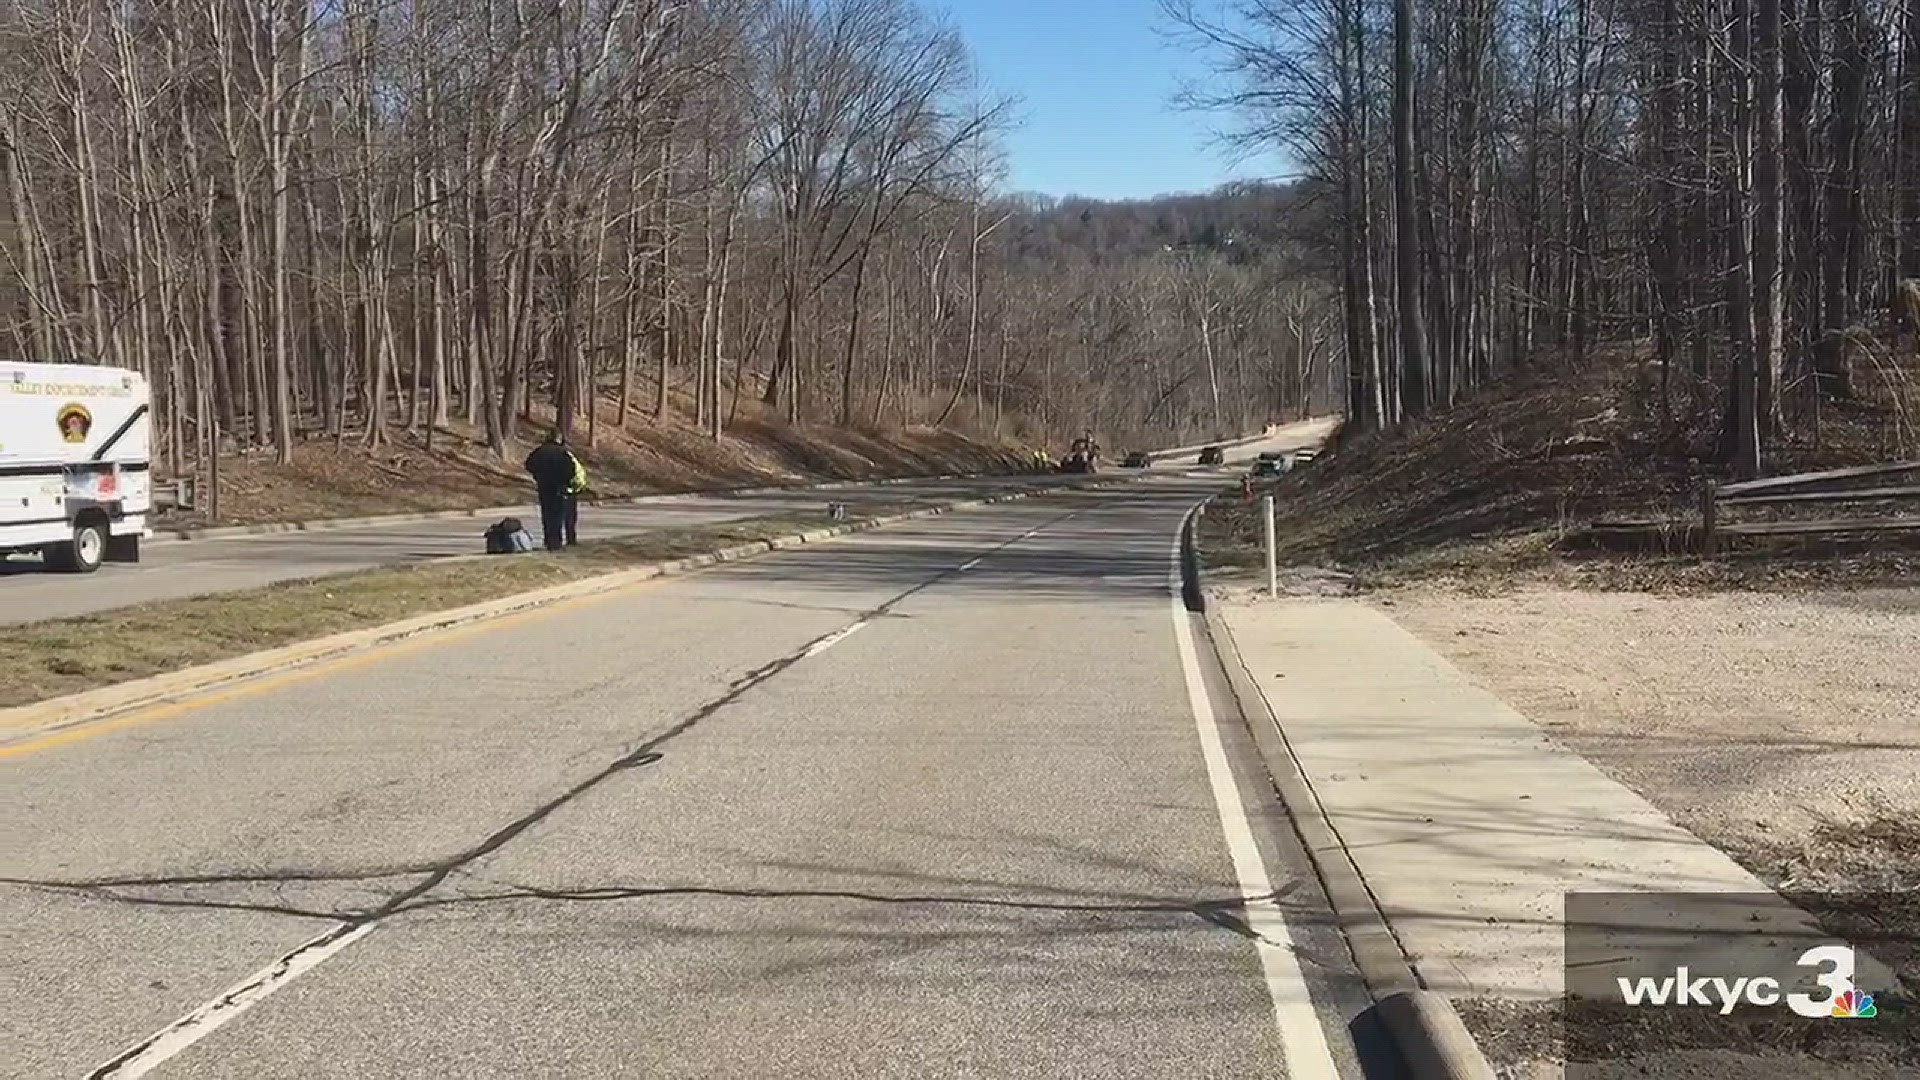 Feb. 27, 2018: Authorities closed a portion of Mayfield Road for several hours Tuesday amid a deadly crash in Gates Mills.